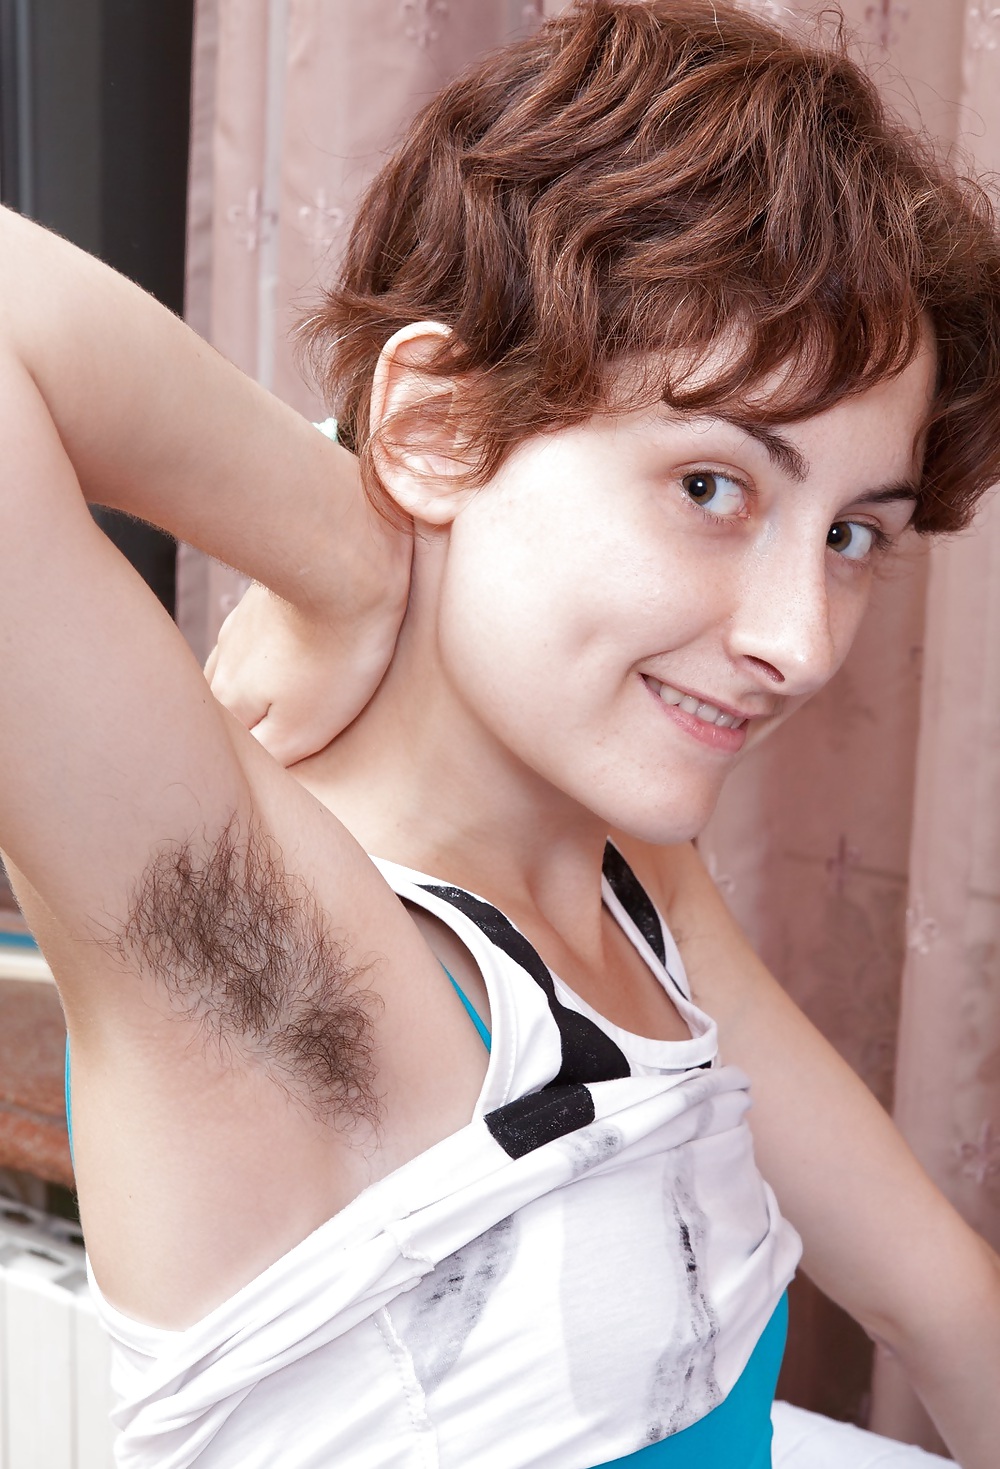 Girls with hairy, unshaven armpits A #37050059